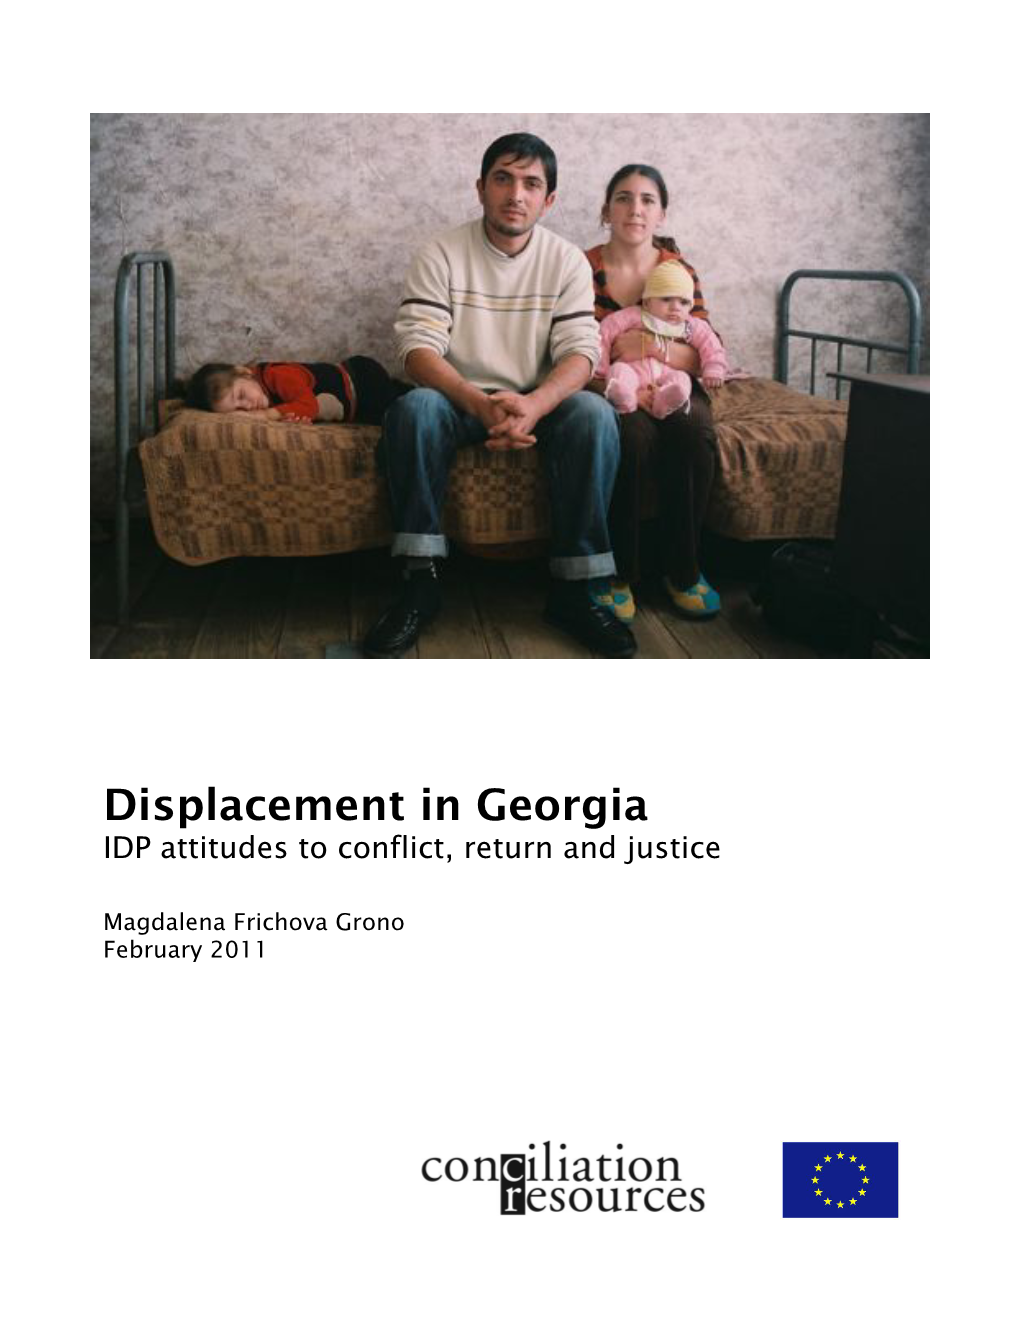 Displacement in Georgia: IDP Attitudes to Conflict, Return and Justice